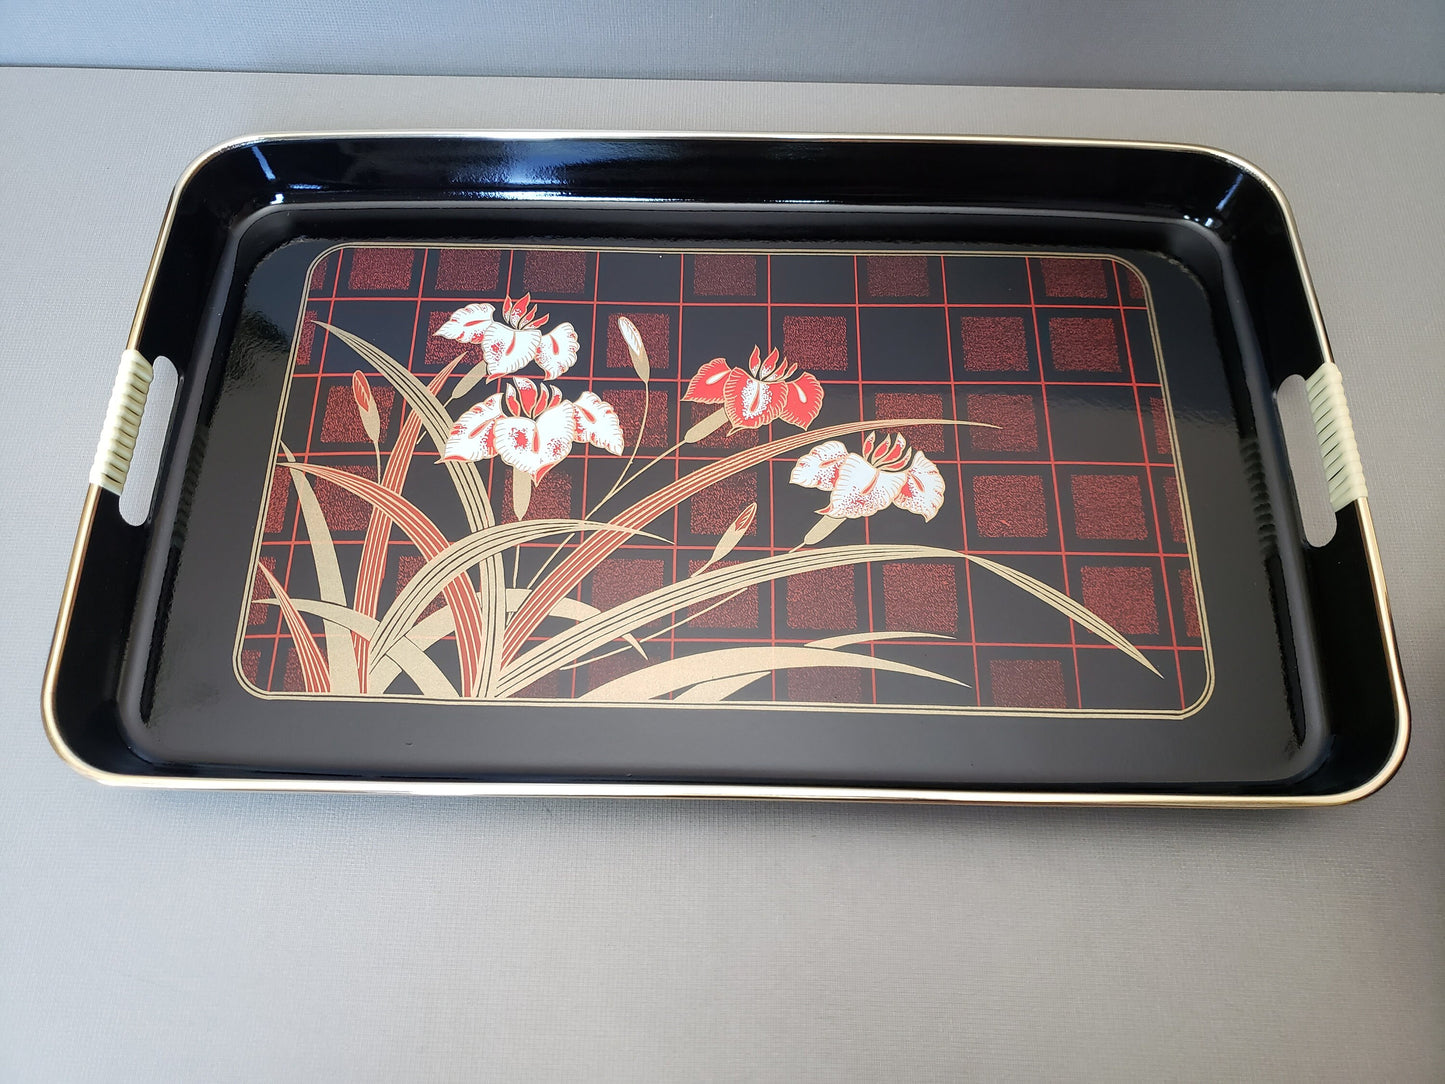 Vintage 1984 Hand-Decorated Lacquerware Tray Set